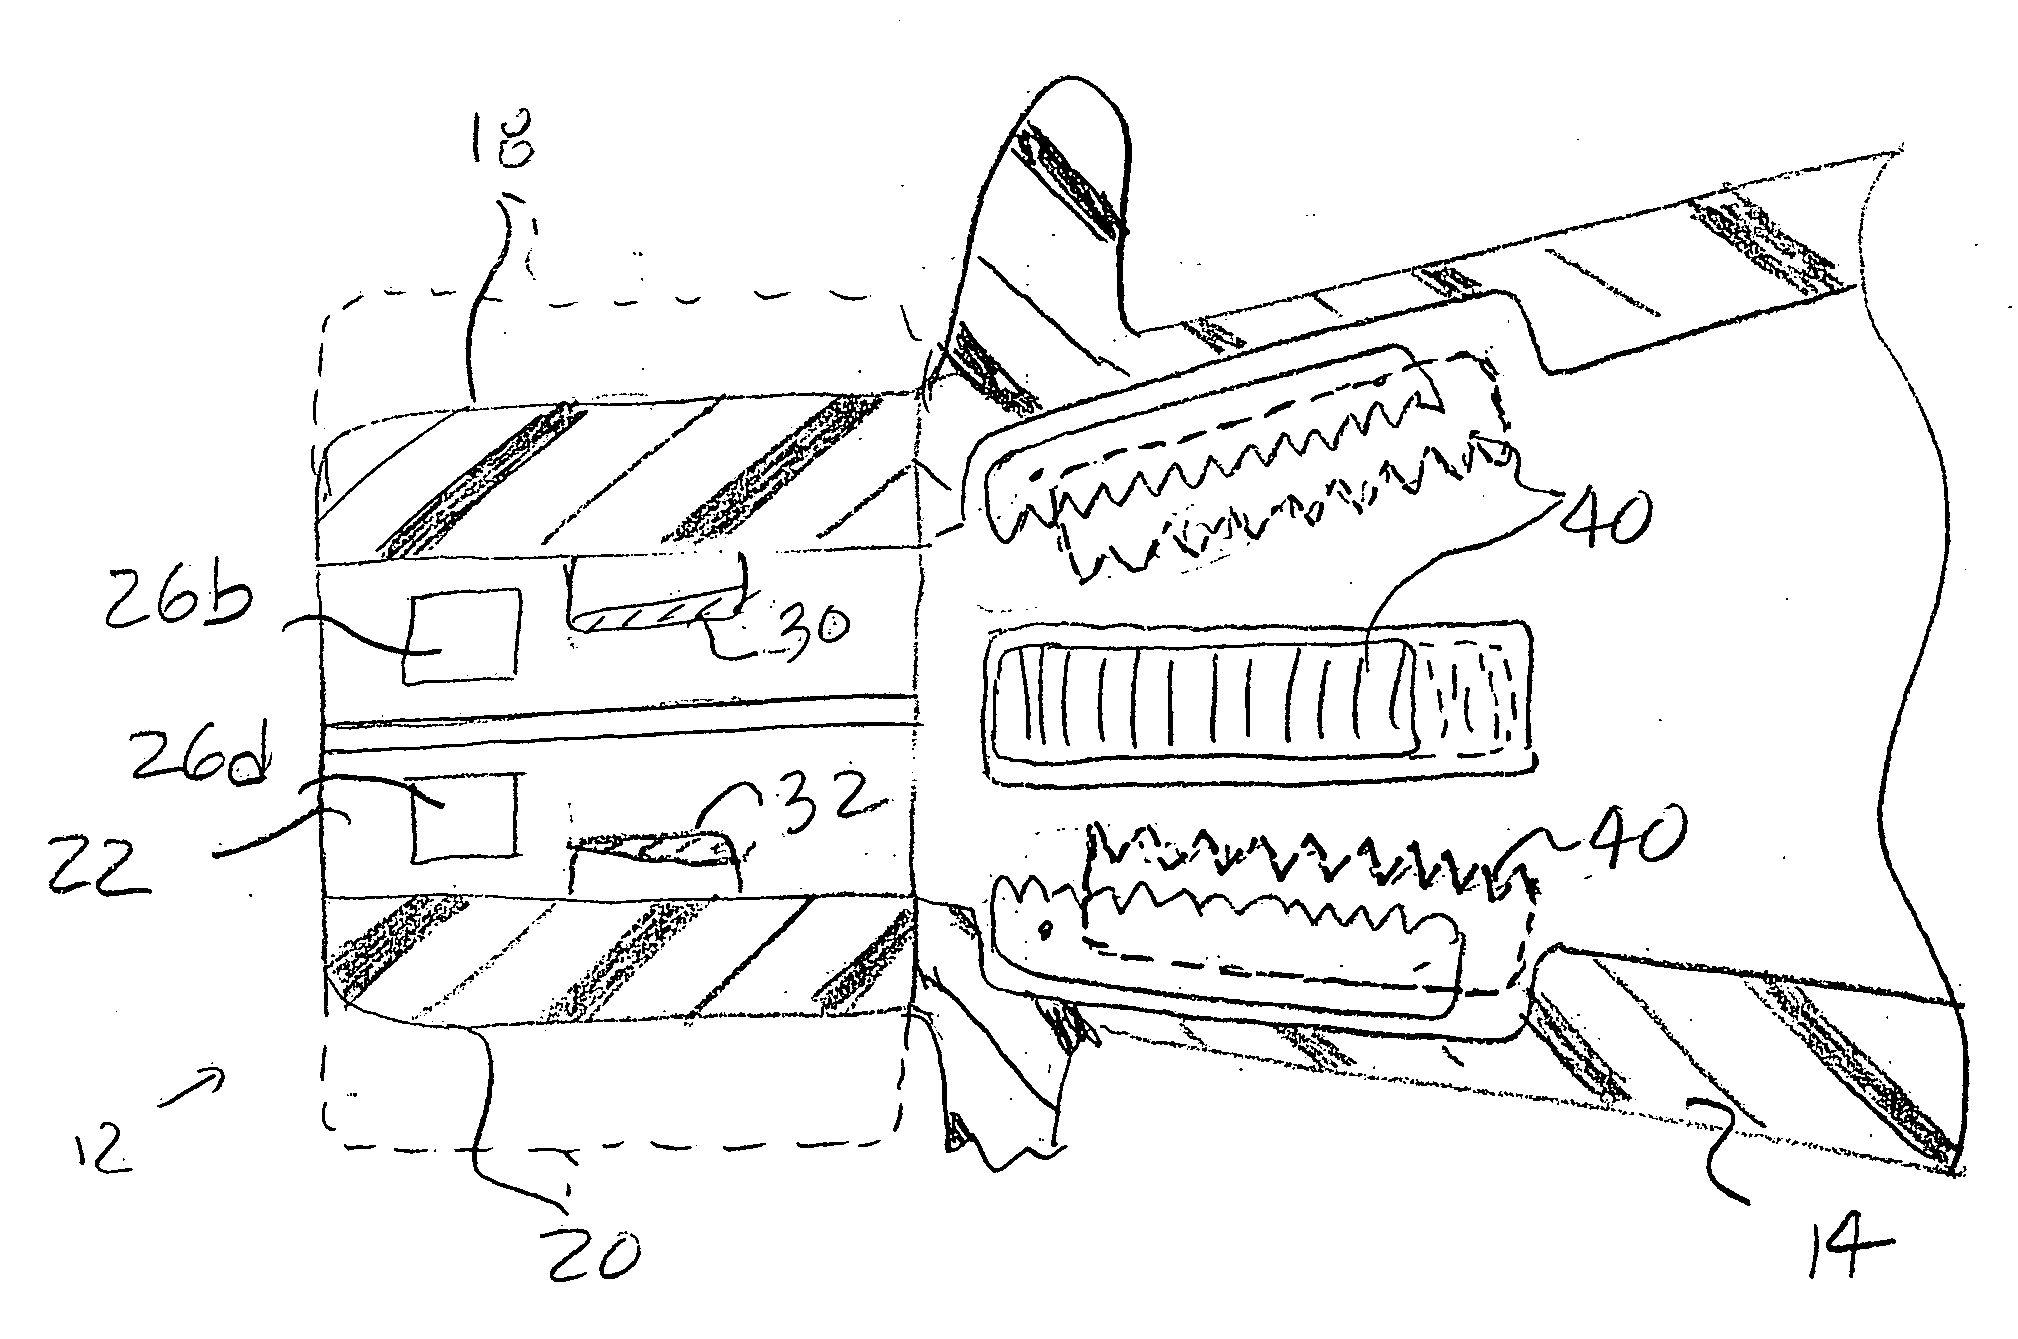 Assisted systems and methods for performing transvaginal hysterectomies